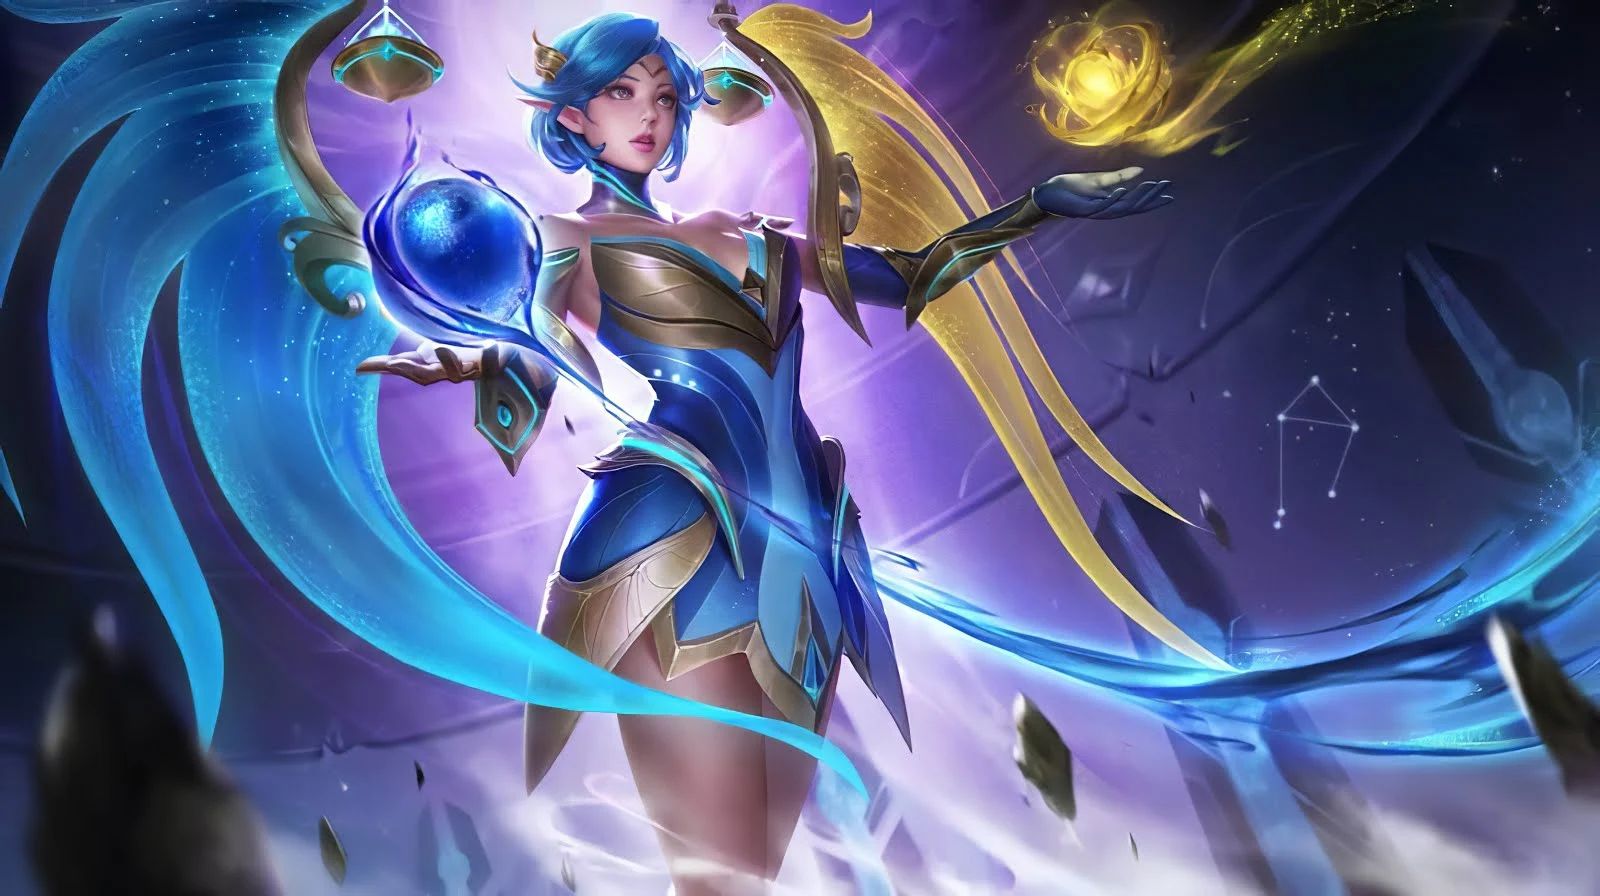 Collection#56 Mobile Legends Wallpapers HD: ALL ZODIAC SKINS WALLPAPERS HD